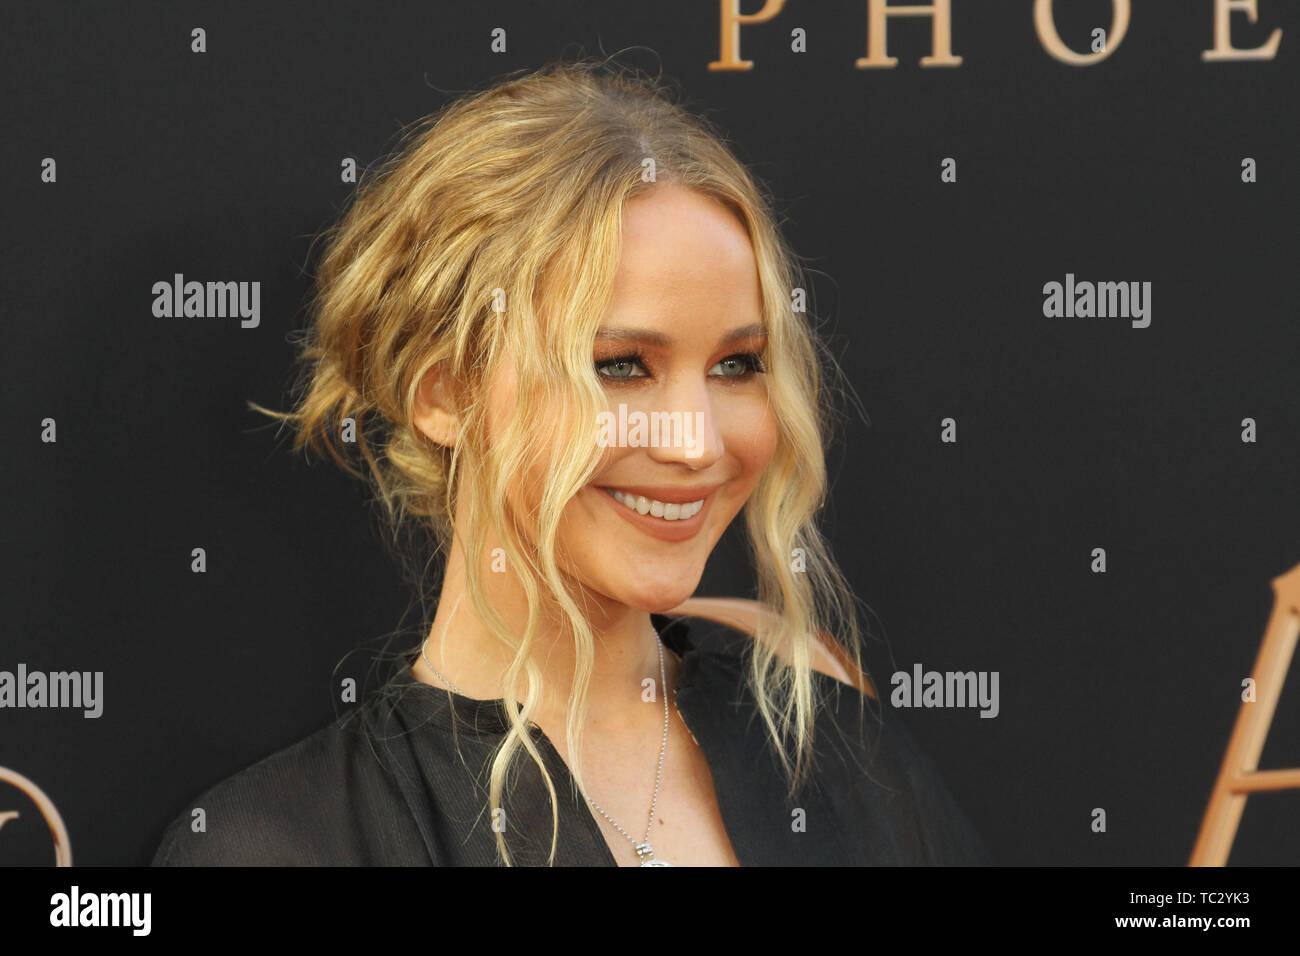 Jennifer Lawrence at the 'Dark Phoenix' Premiere held at the TCL Chinese Theatre IMAX, Los Angeles, CA, June 4, 2019. Photo Credit: Joseph Martinez / PictureLux Stock Photo